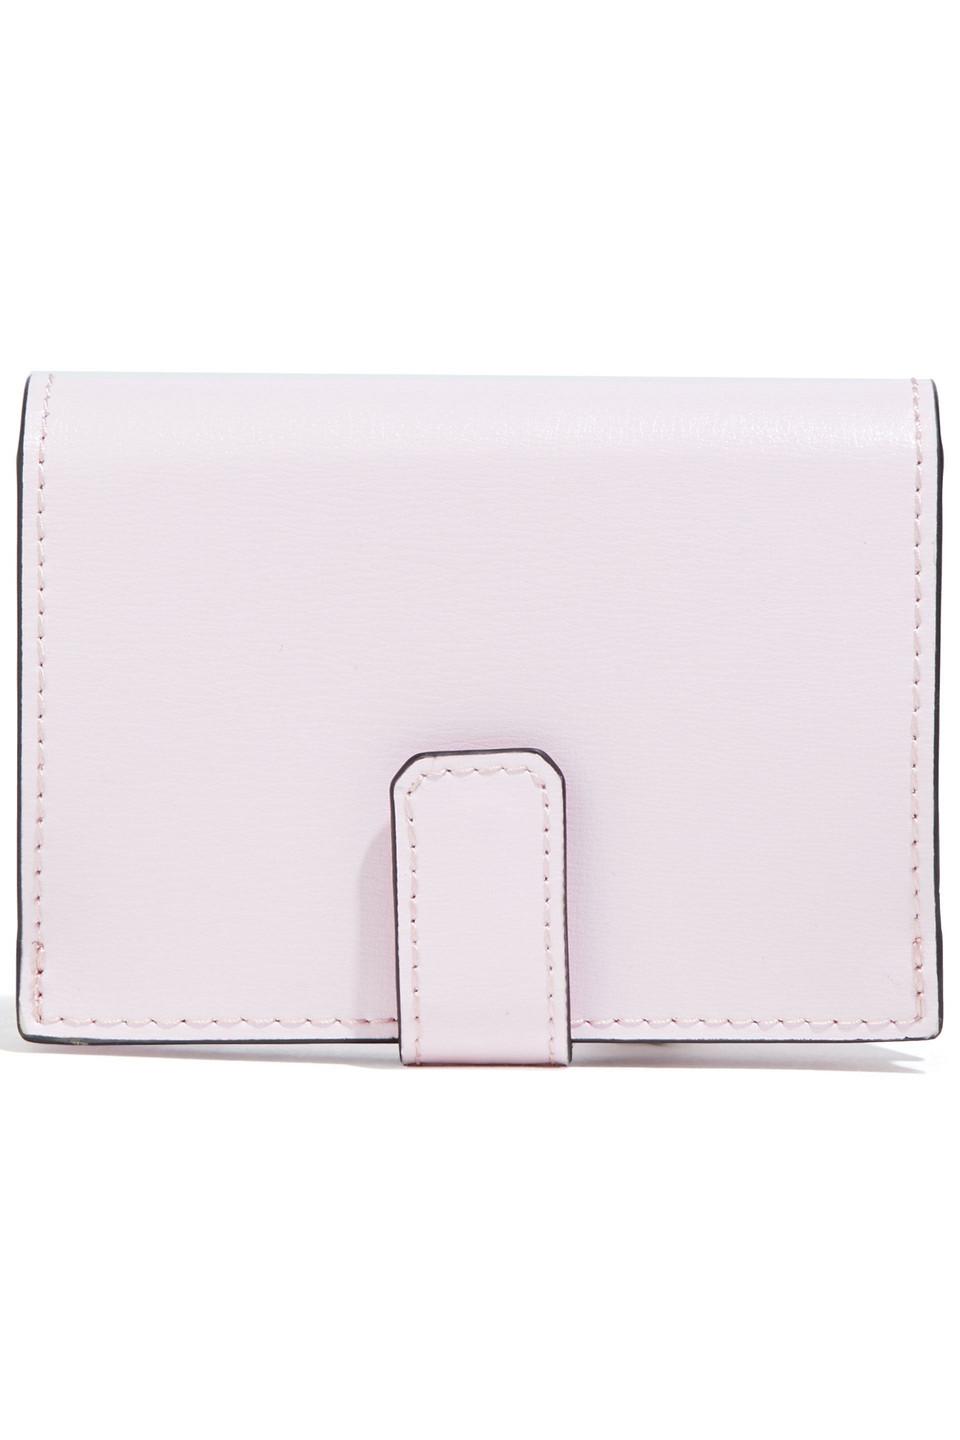 Ganni Leather Cardholder in Baby Pink (Pink) - Lyst